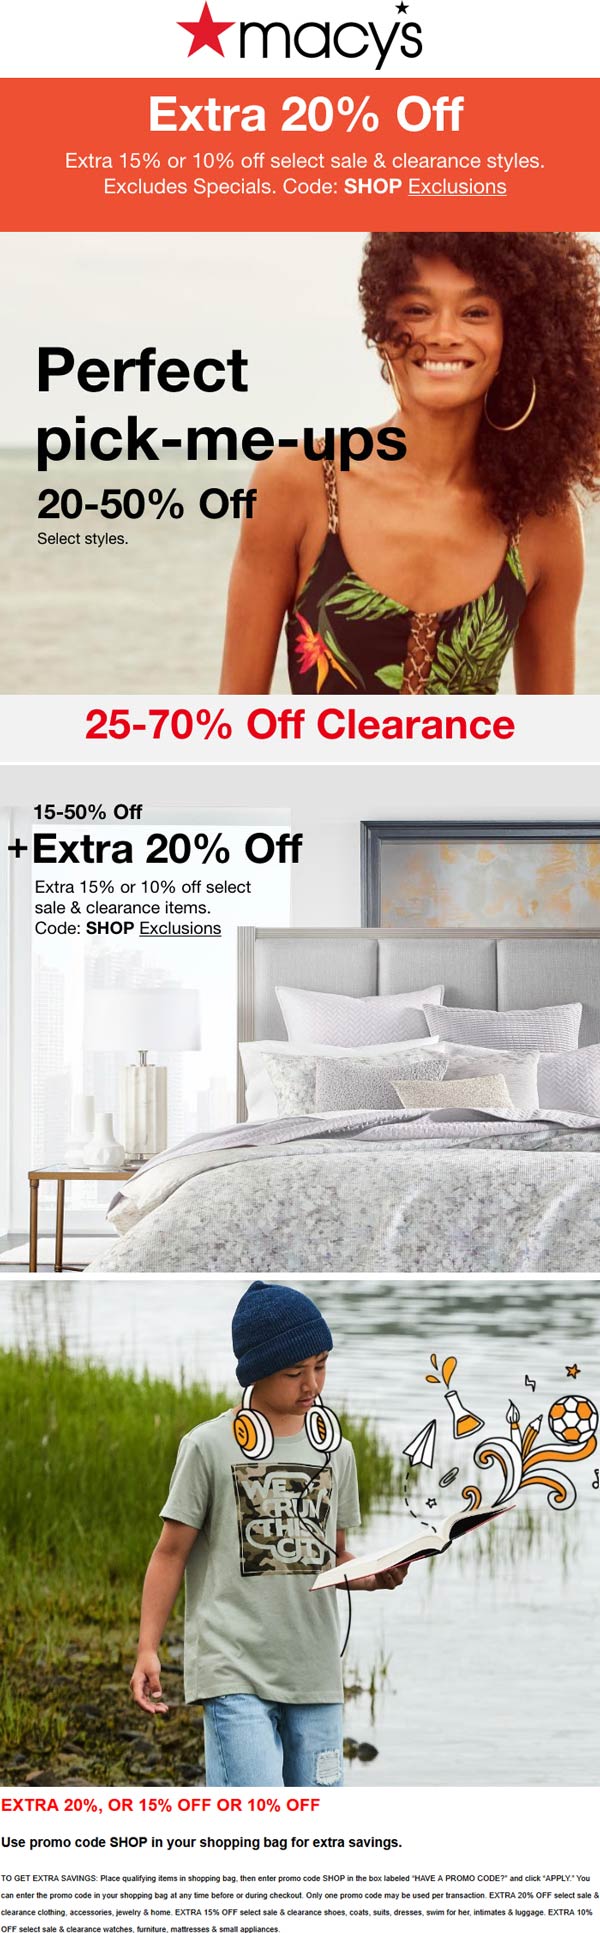 Macys stores Coupon  Extra 10-20% off at Macys, or tap promo codes button for auto-savings online #macys 